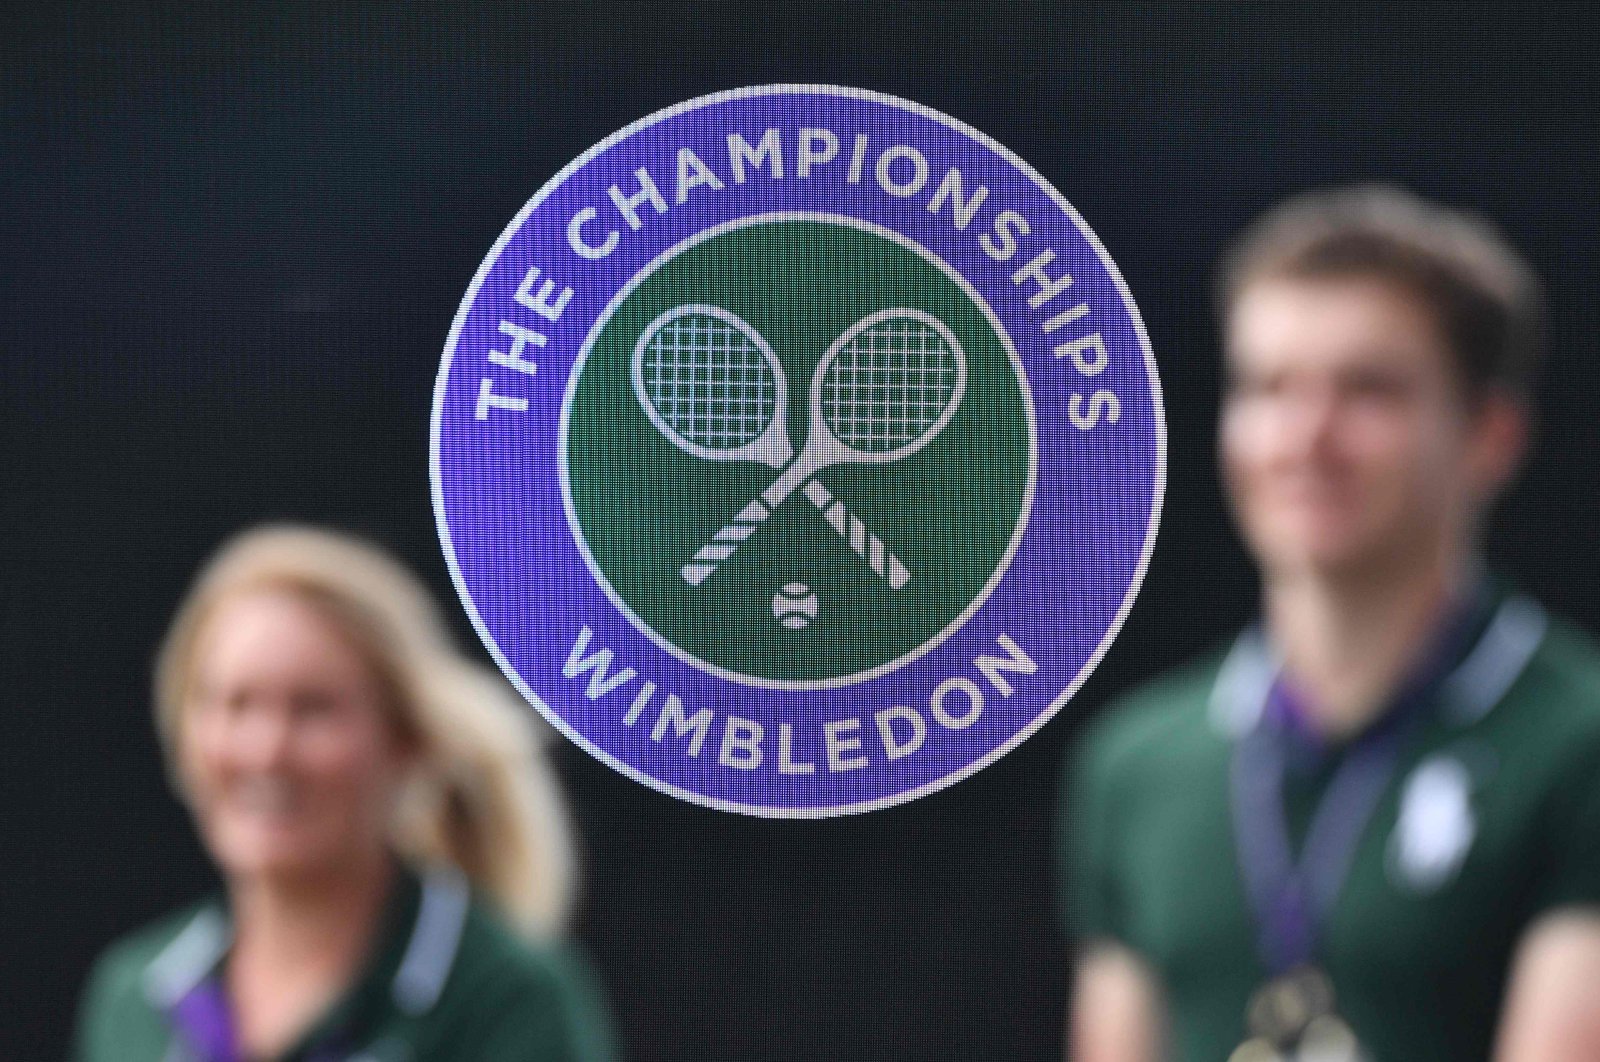 This July 01, 2019, file photo shows the Wimbledon emblem at The All England Tennis Club in Wimbledon, southwest London, July 1, 2019. (AFP Photo)